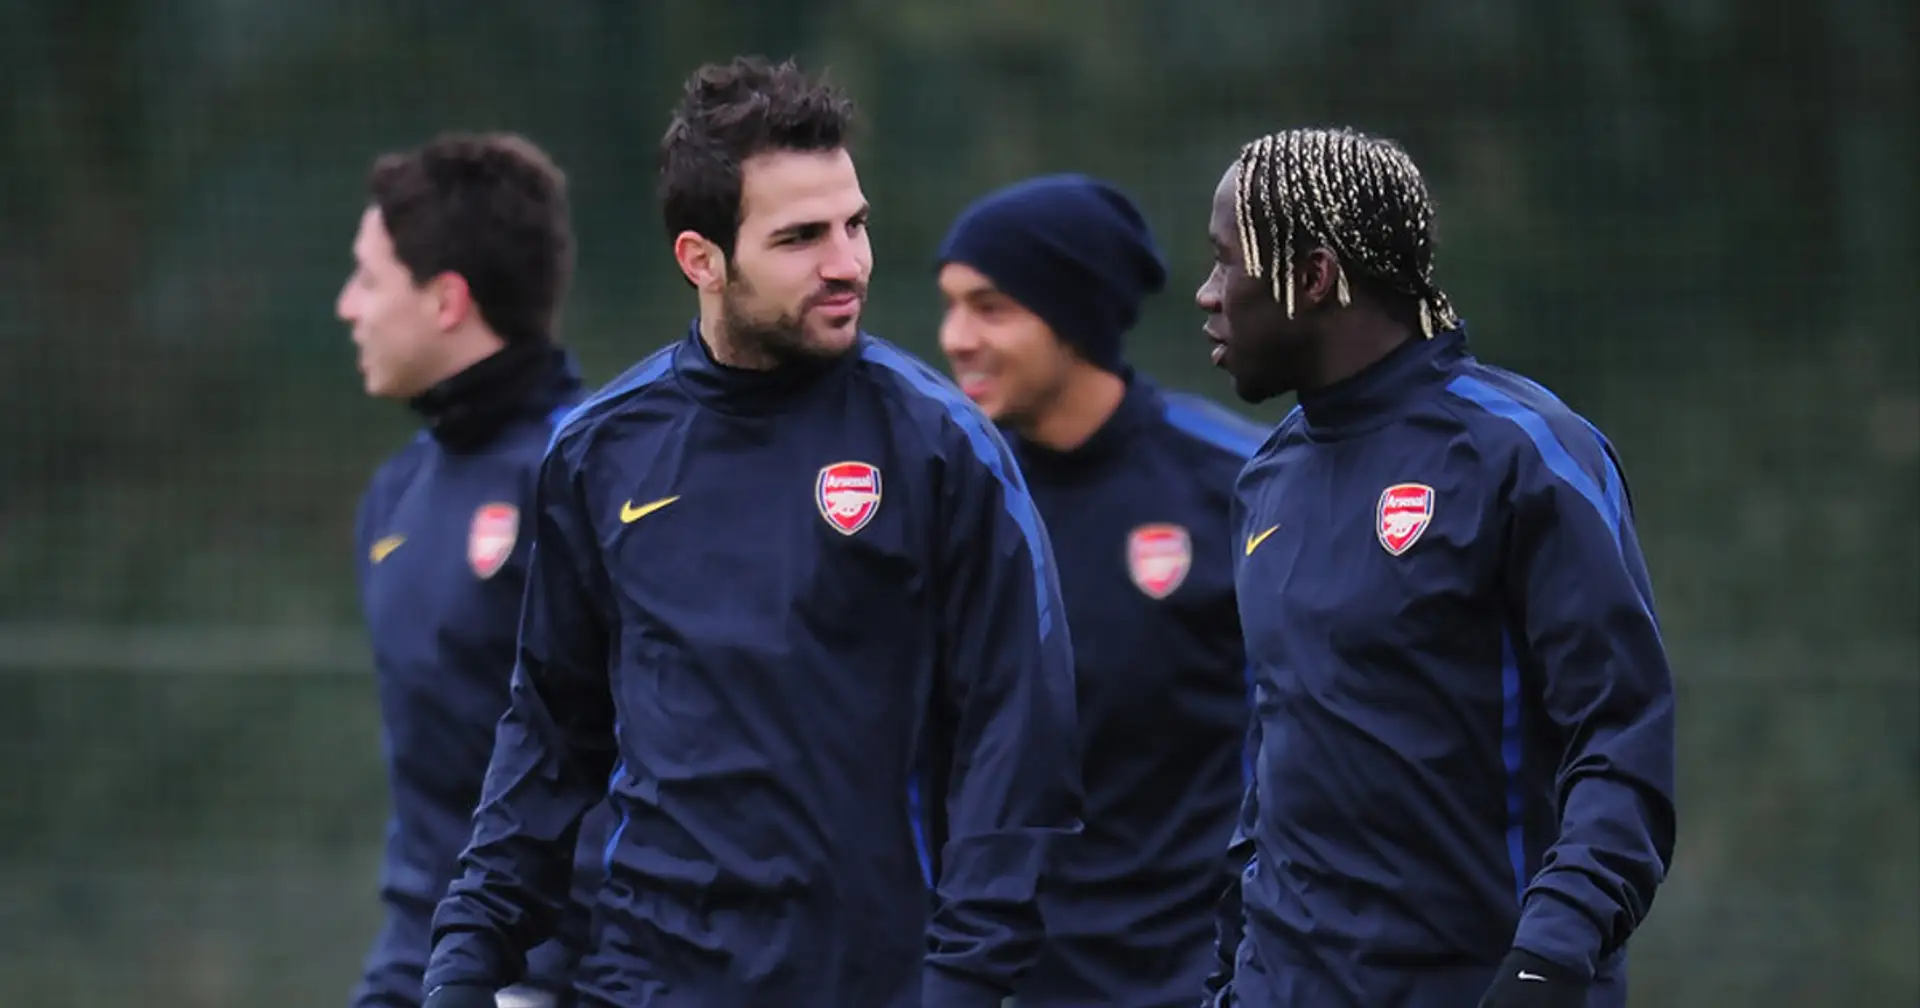 'You don't speak like that about your club': Bacary Sagna hits back at Fabregas over 'harsh' Arsenal comments